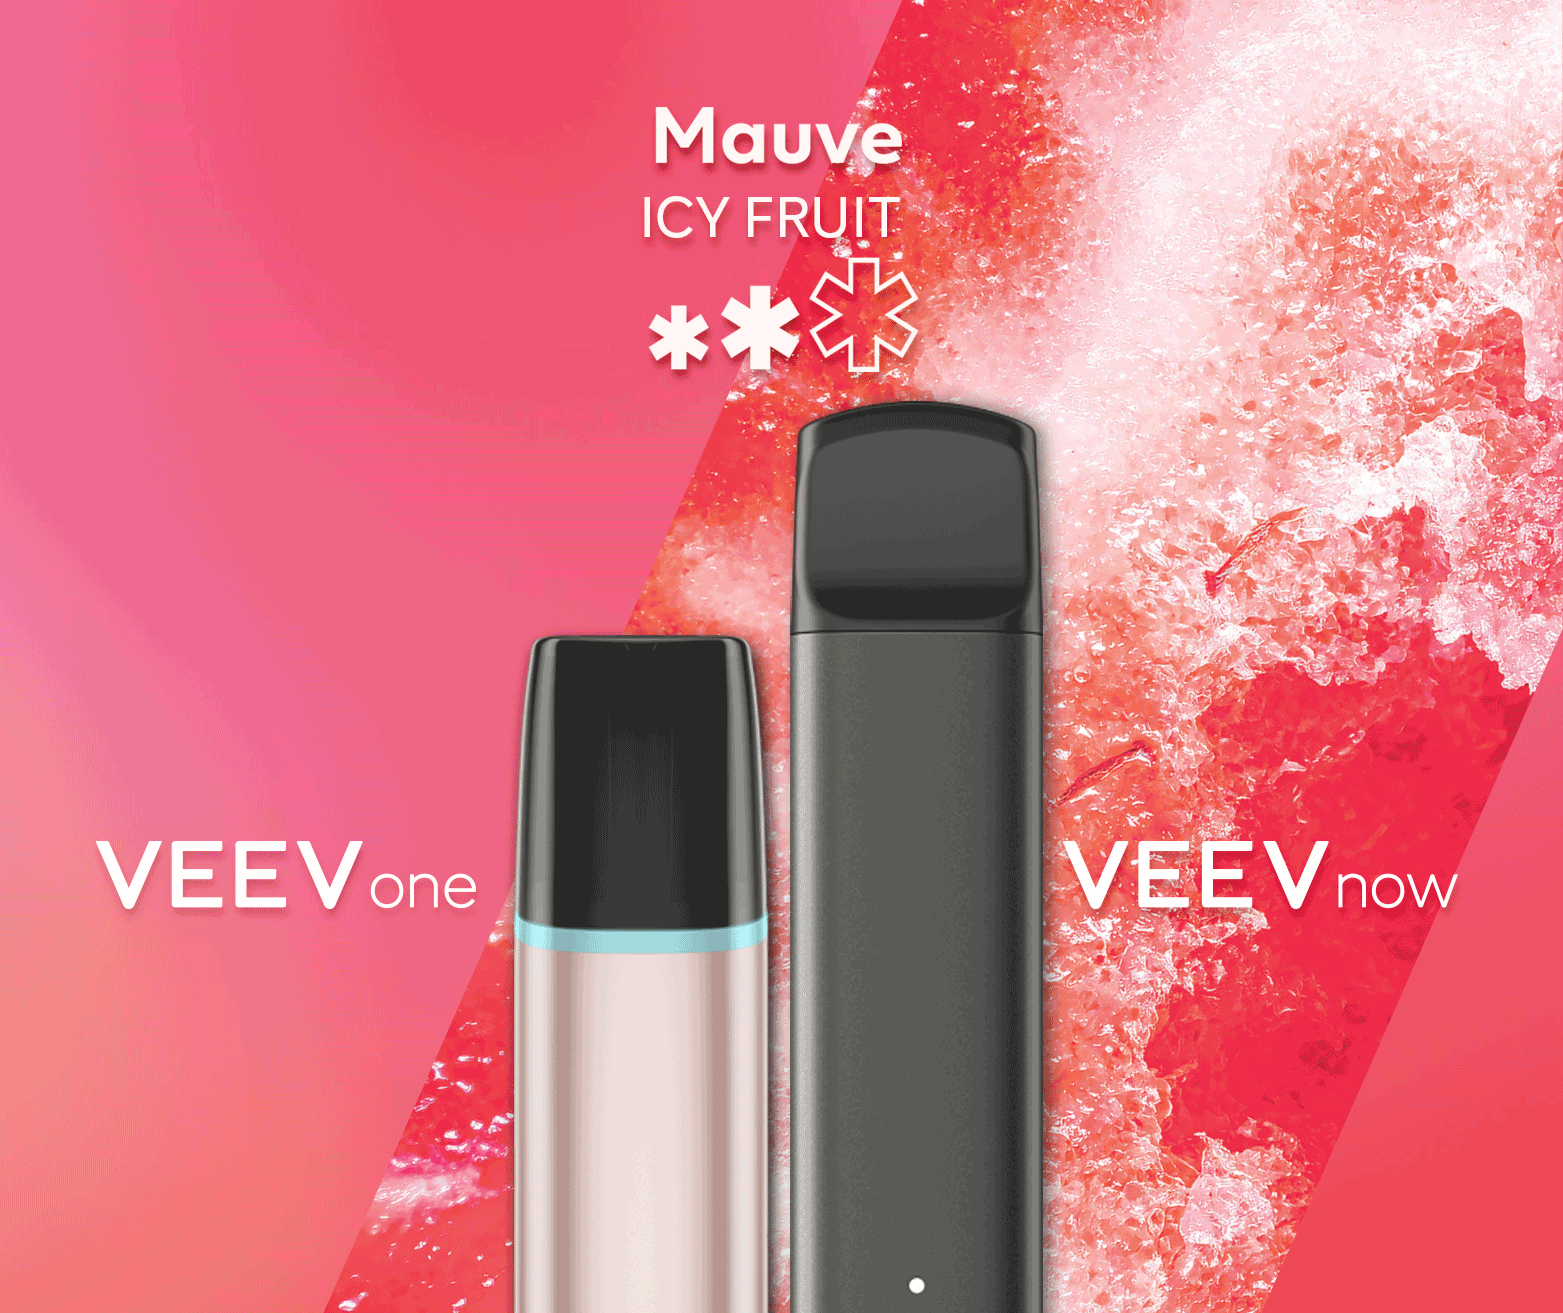 A VEEV ONE pod device and VEEV NOW disposable, both in Mauve flavour.